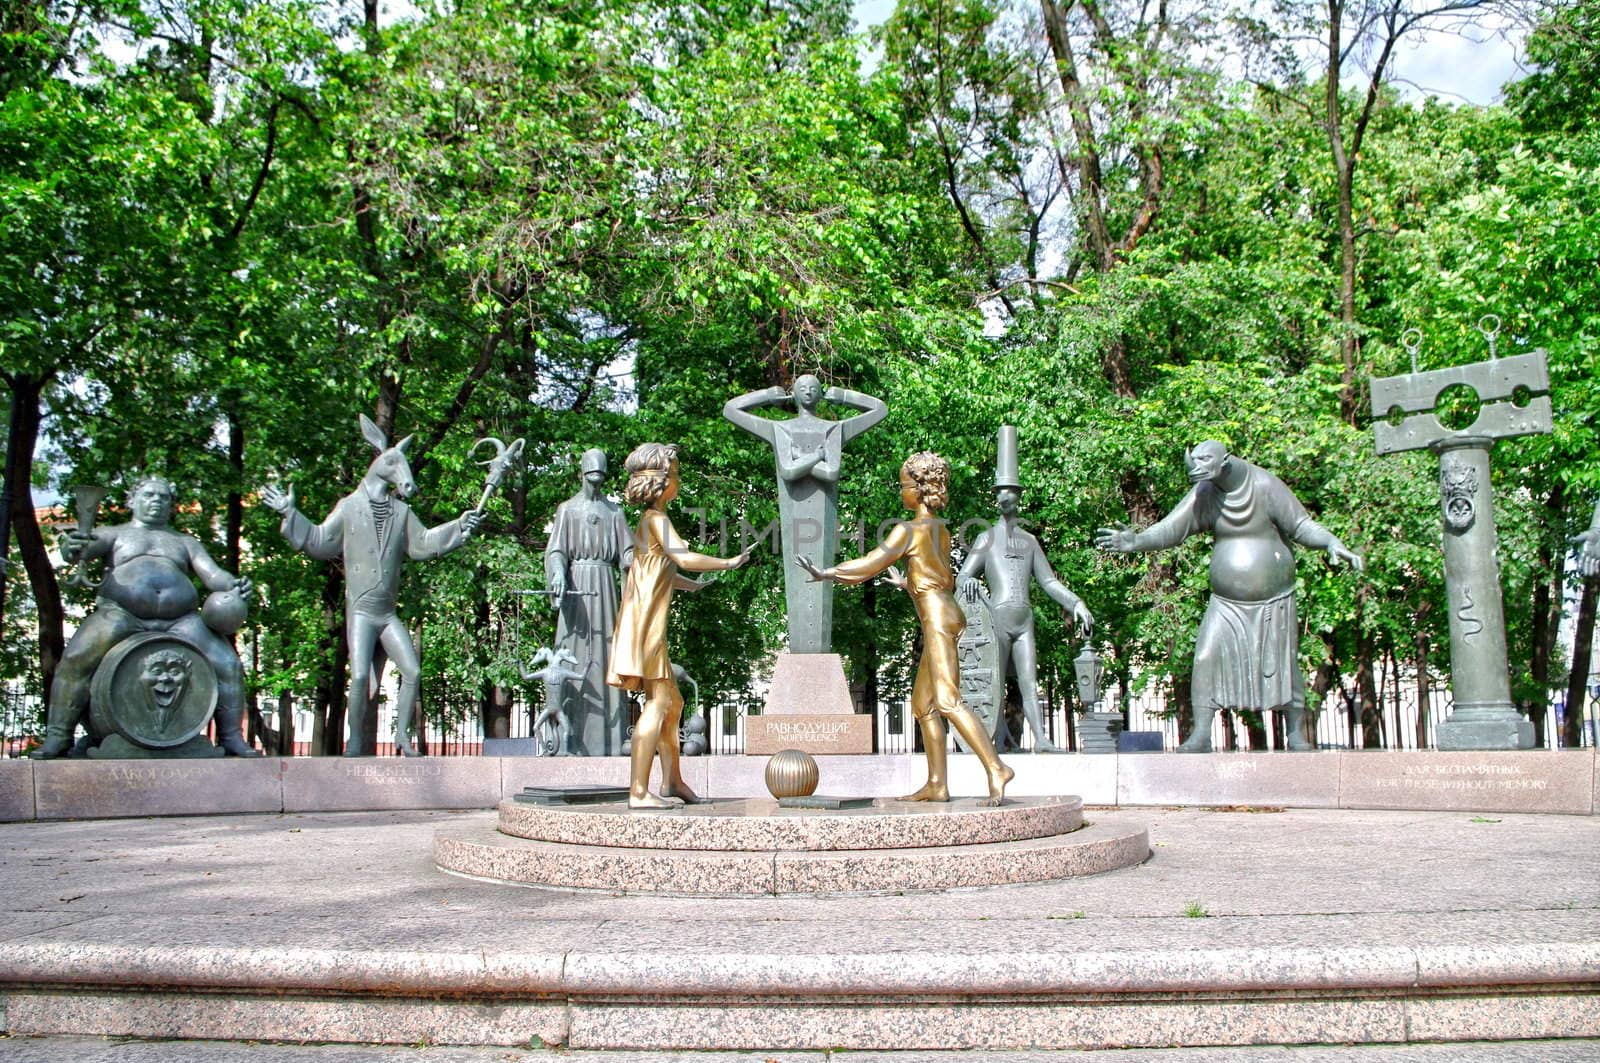 The children - victims of adult vices. Monument, Moscow by Stoyanov